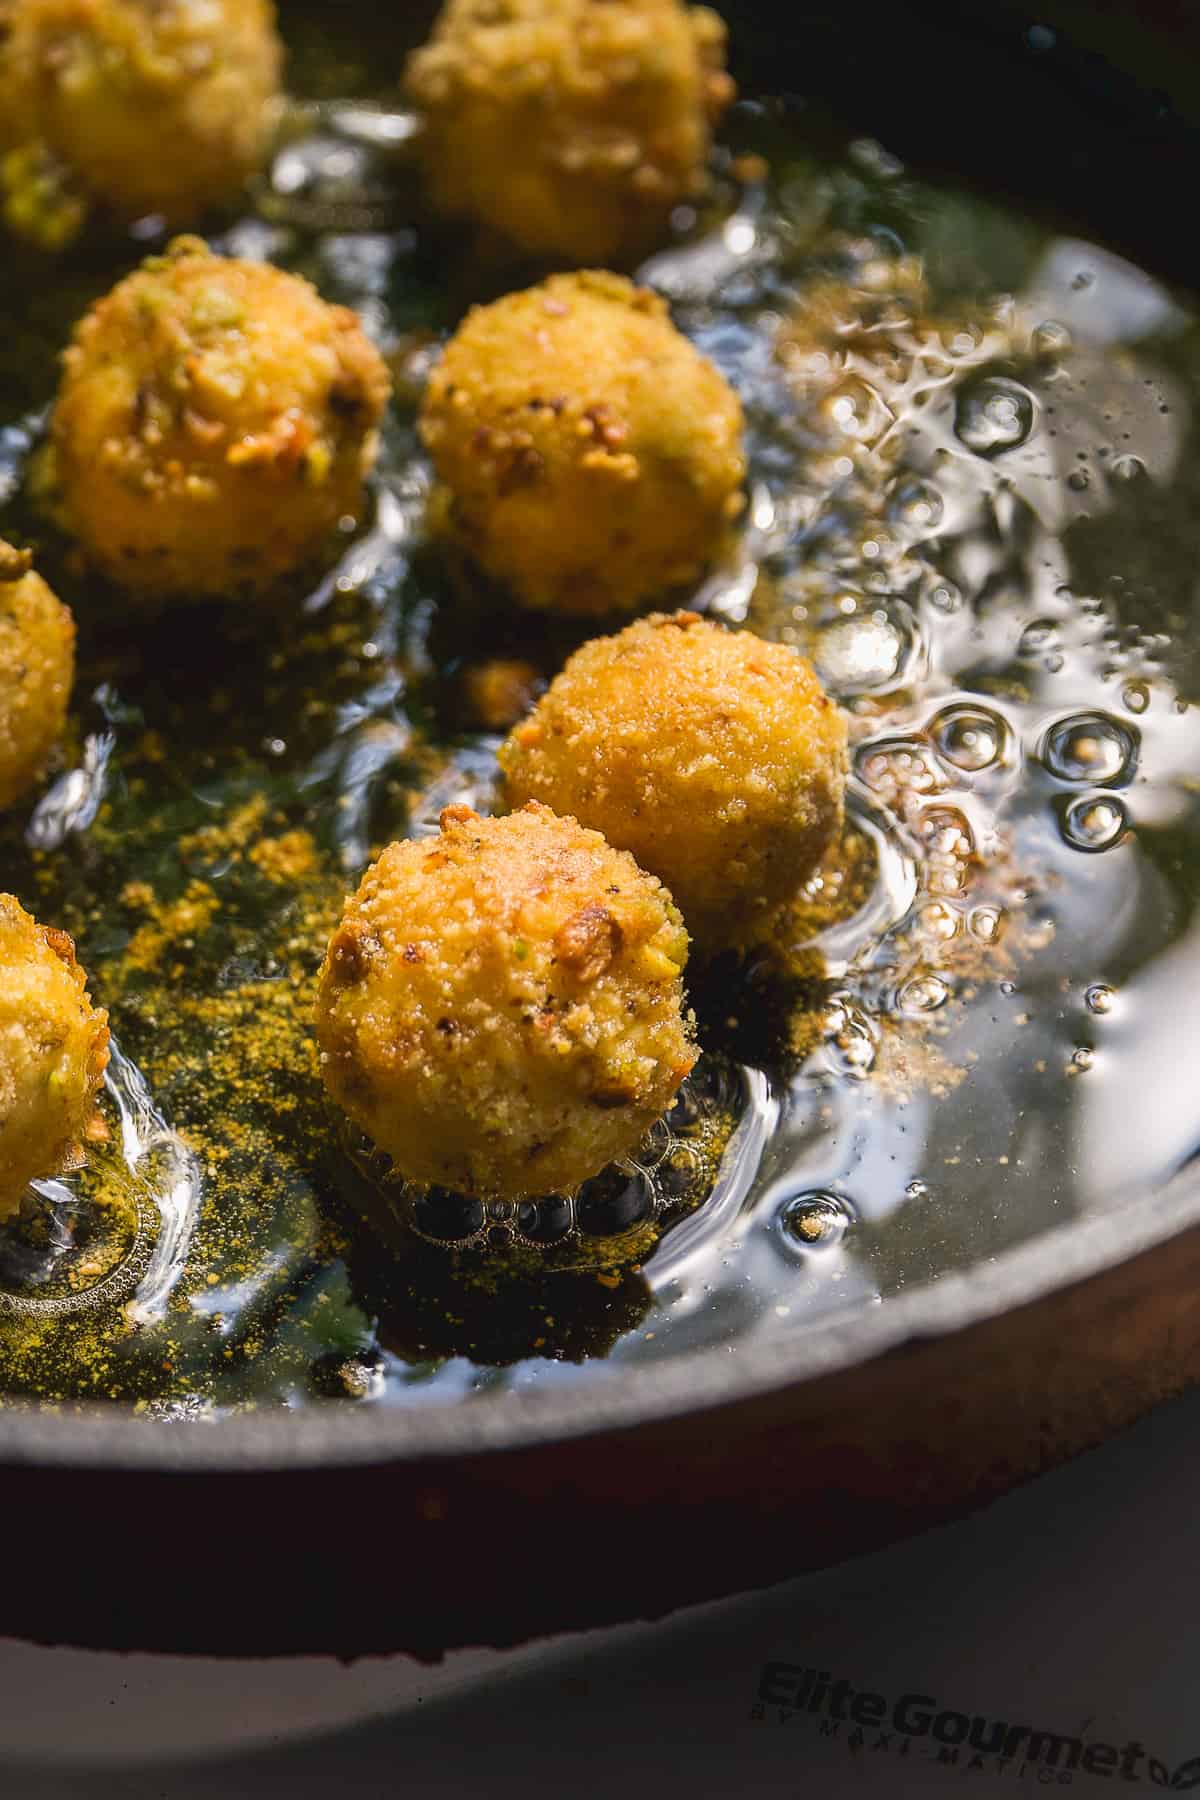 Goat cheese balls being pan fried in a pan.